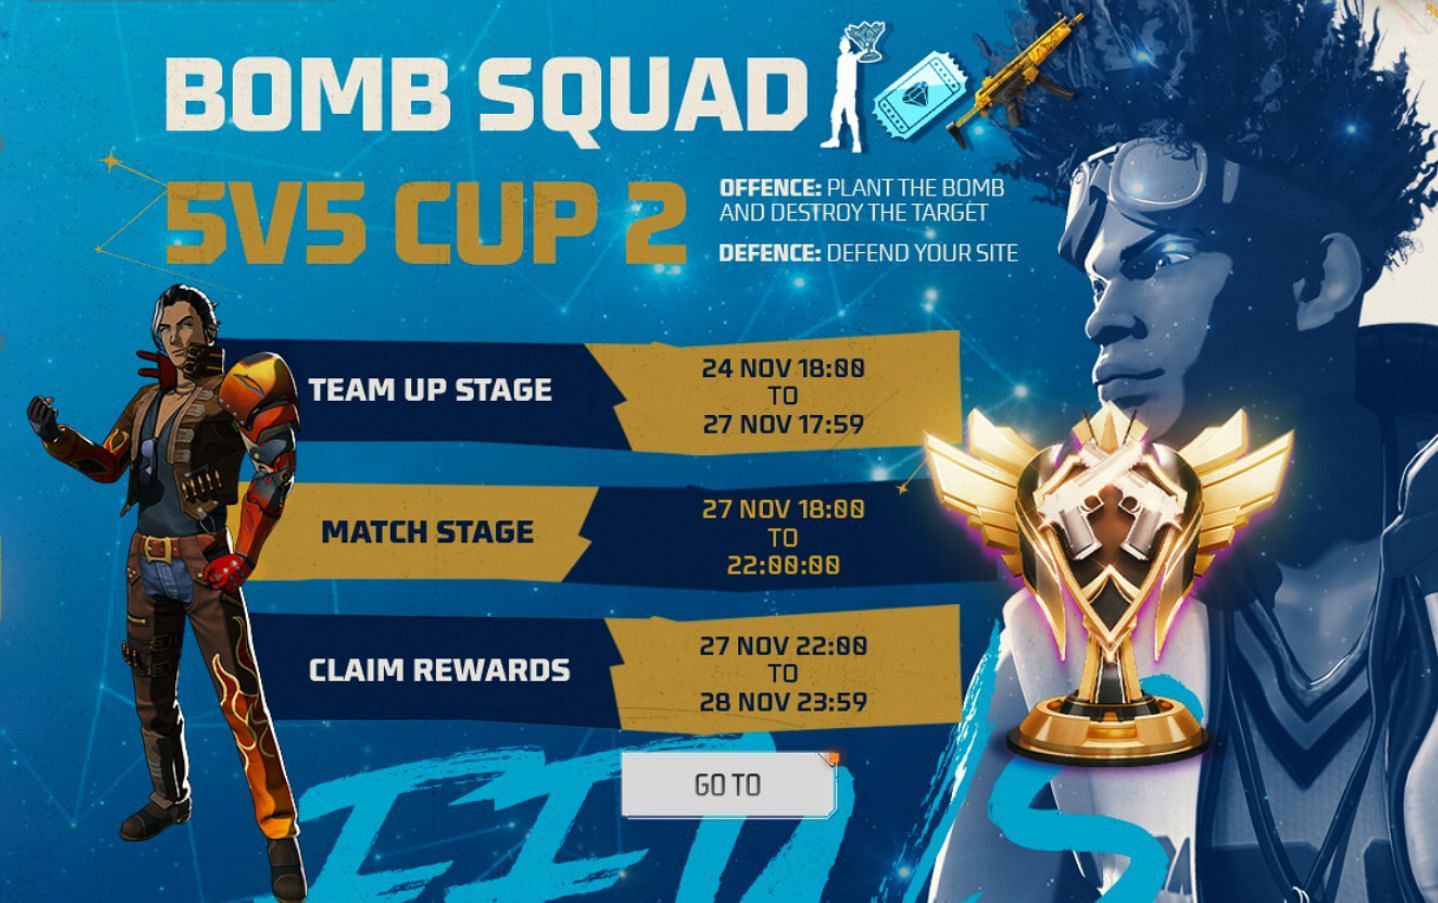 Players can check out the Bomb Squad 5v5 Cup 2&#039;s tournament lobby for more details (Image via Garena)